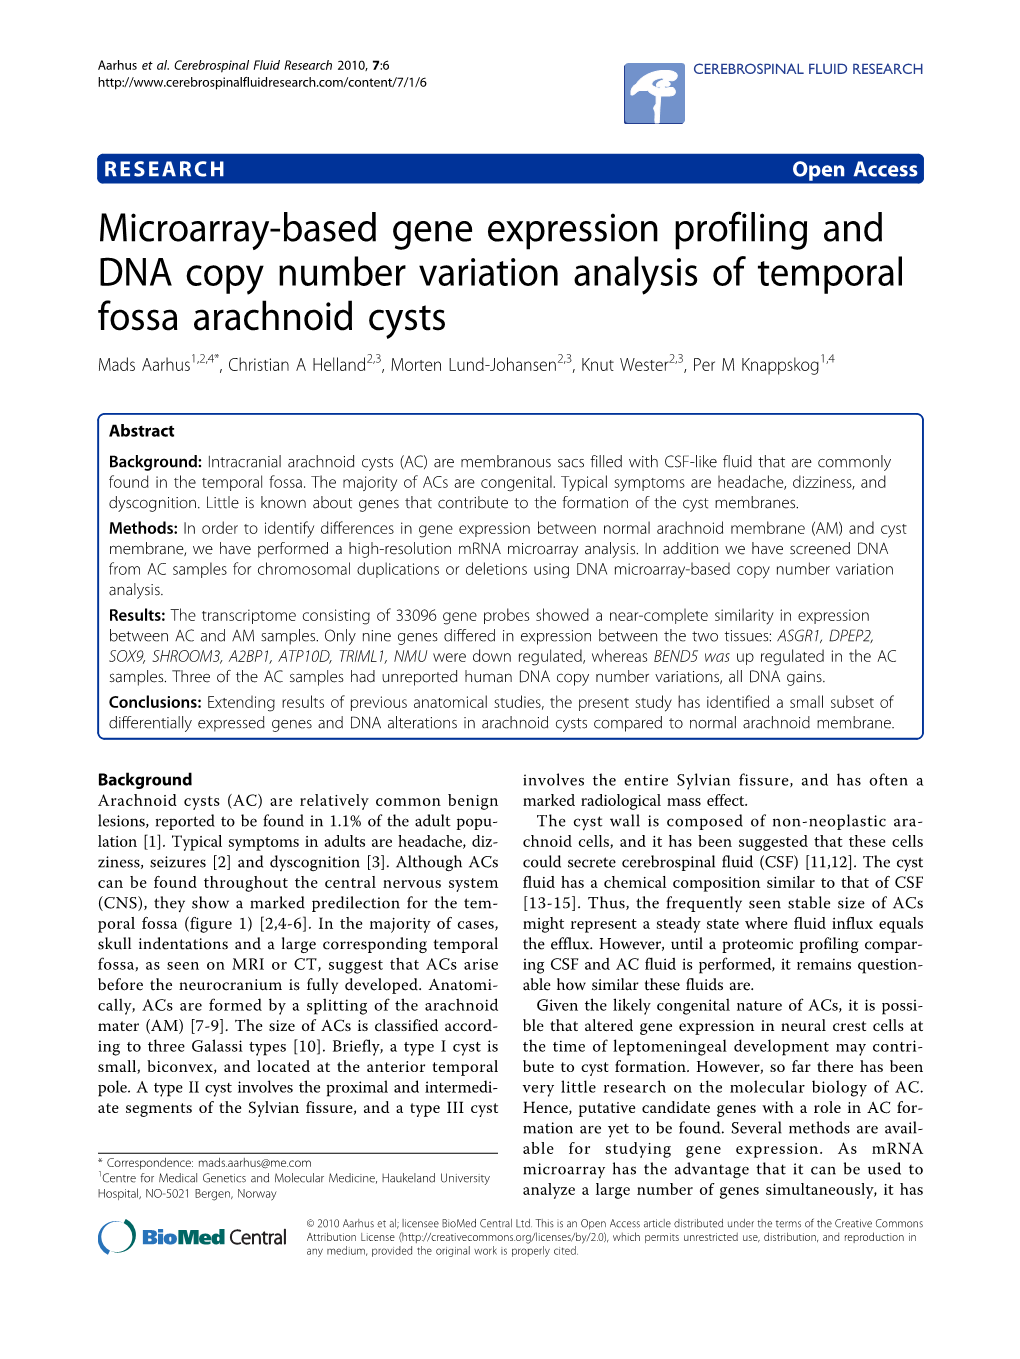 Microarray-Based Gene Expression Profiling and DNA Copy Number